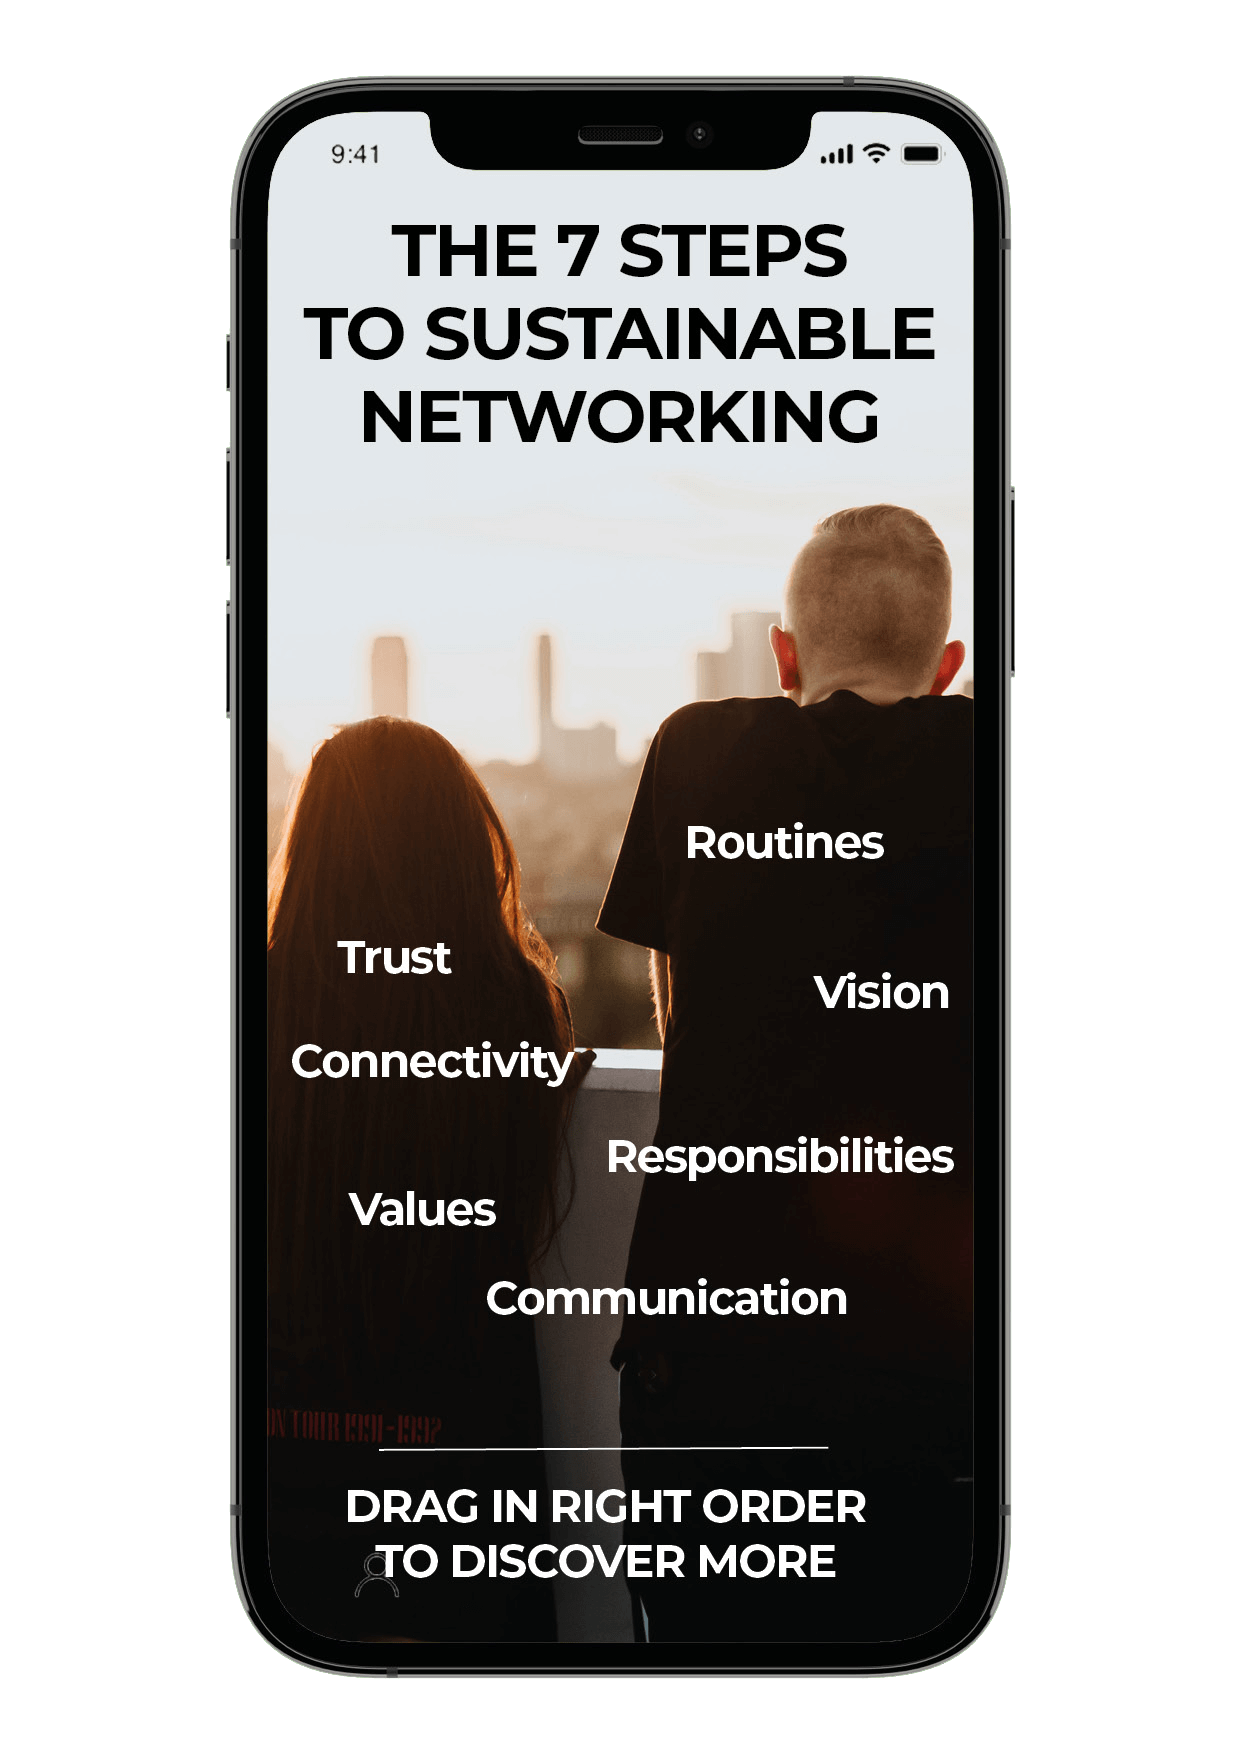 17ACADEMY Sustainable Networking SDG